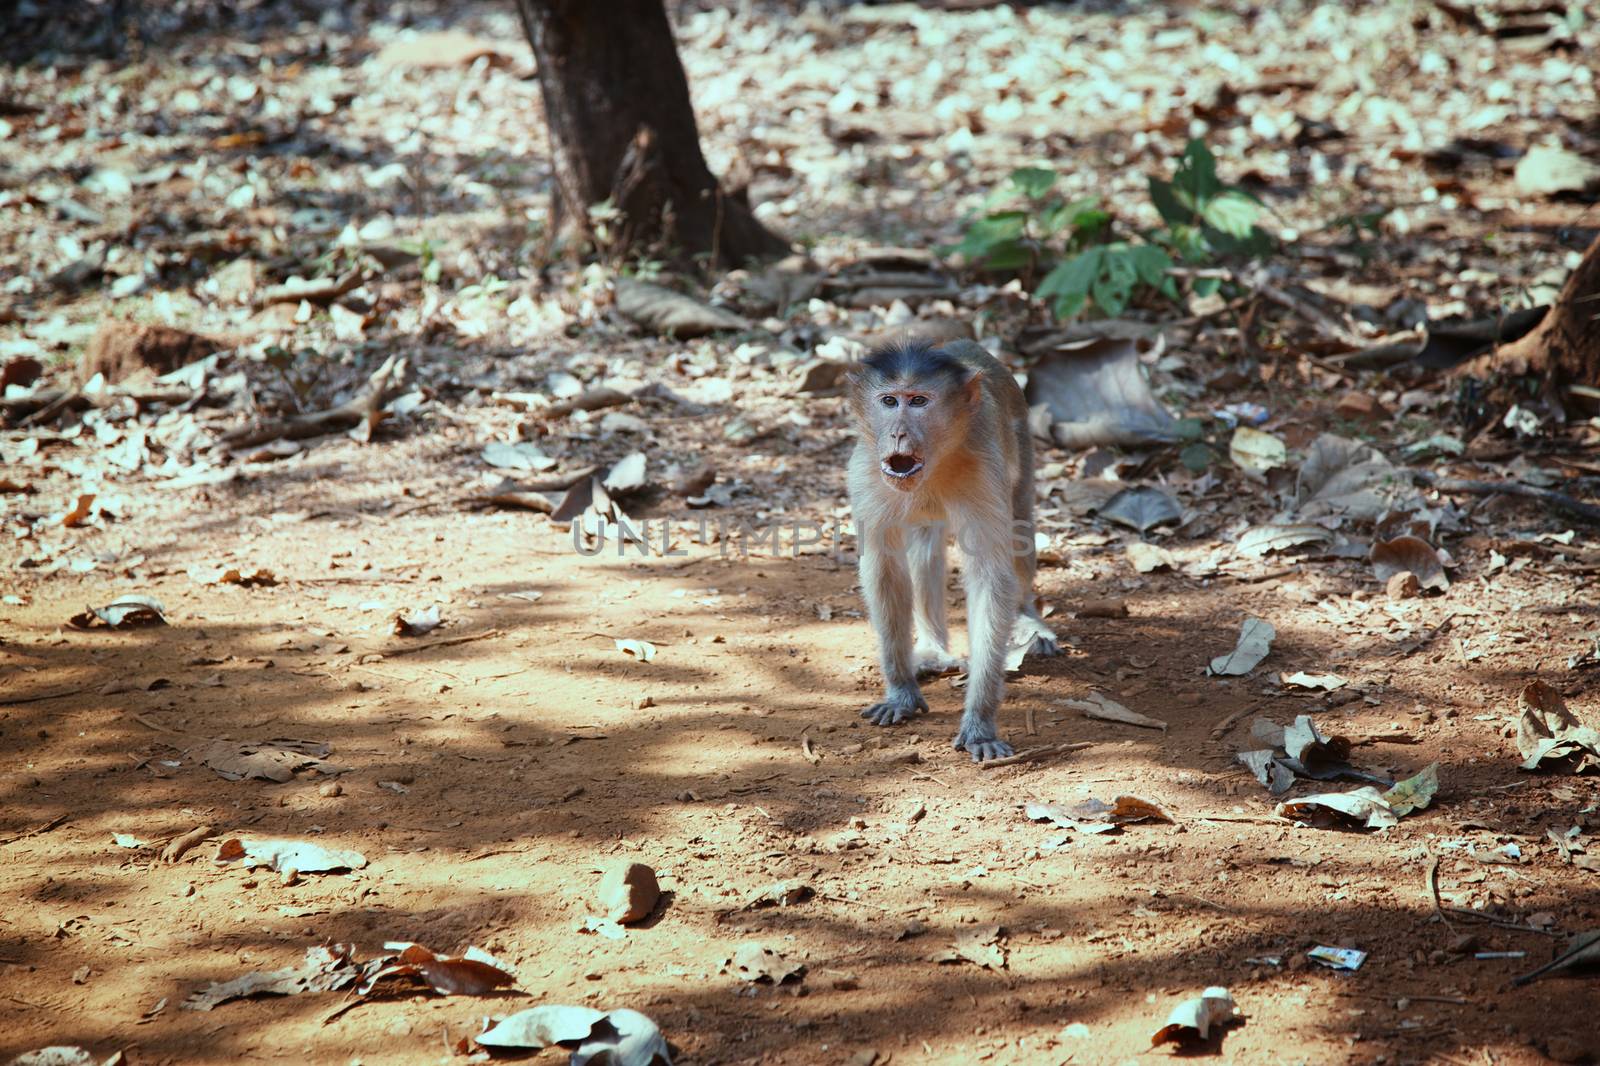 Wild monkey in the jungle of India by Novic